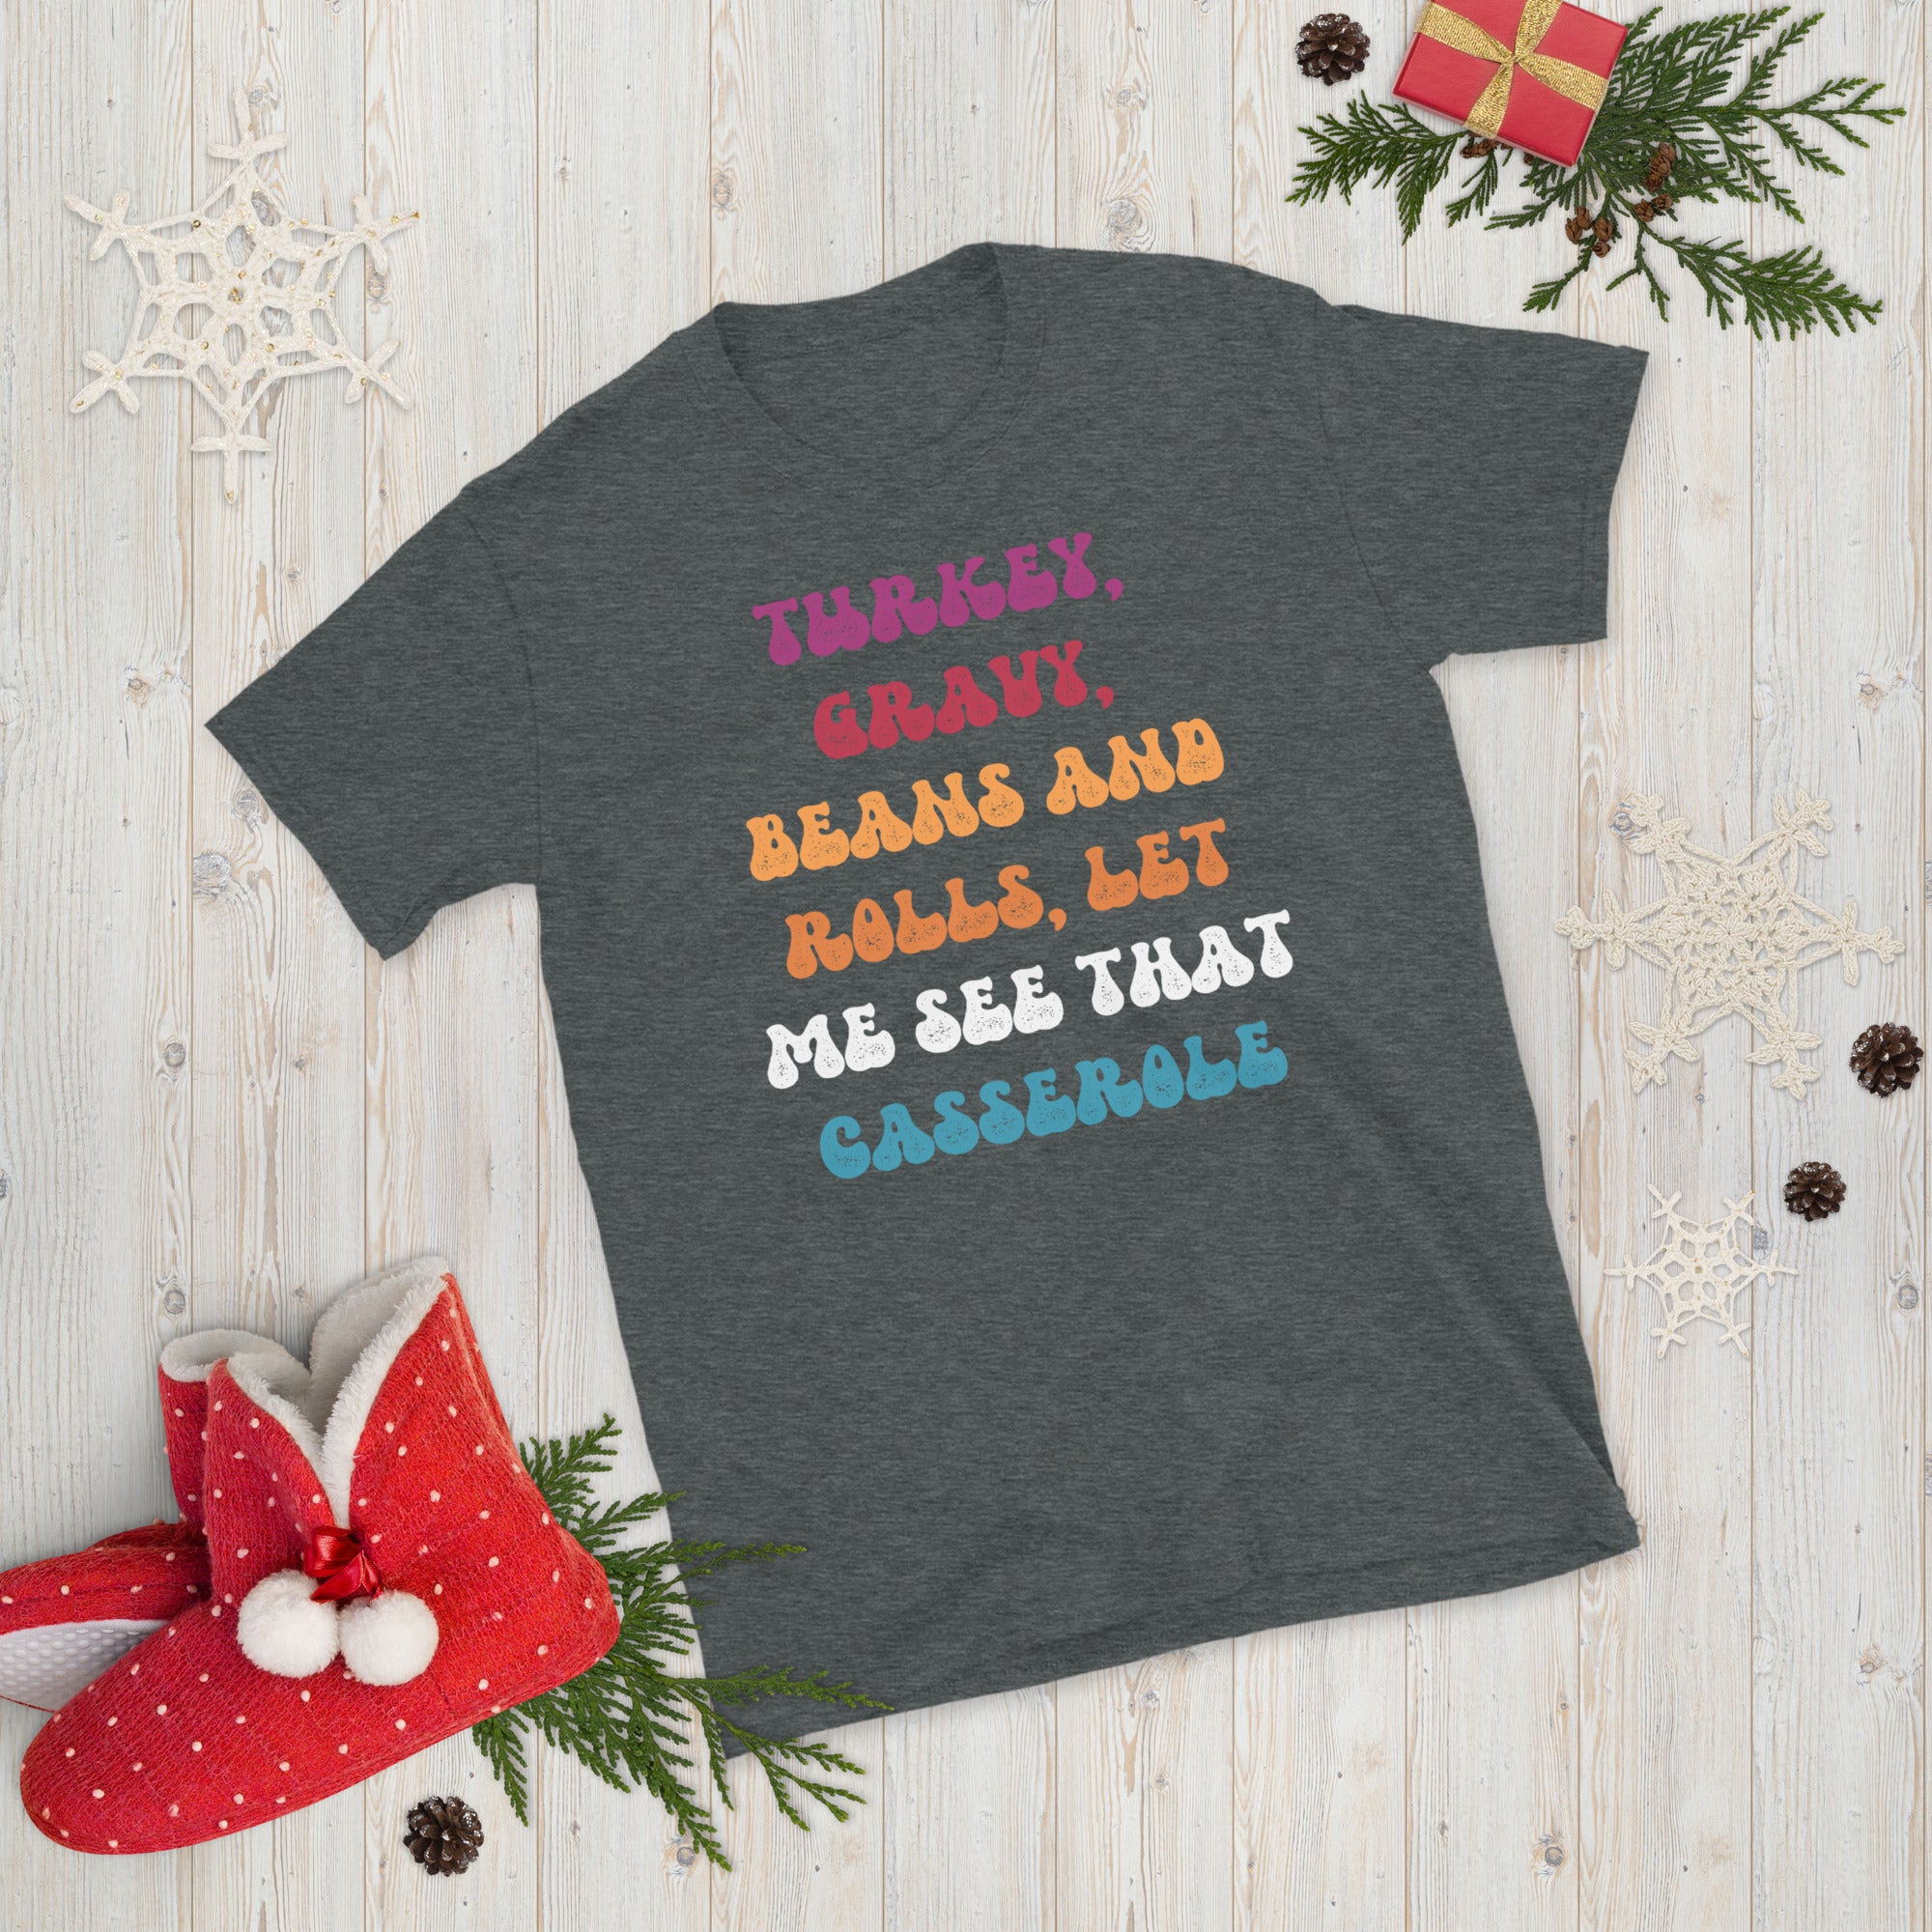 Turkey Gravy Beans And Rolls Let Me See That Casserole Shirt, Thanksgiving Funny Shirt, Turkey Lover TShirt, Family Thanksgiving Gifts - Madeinsea©